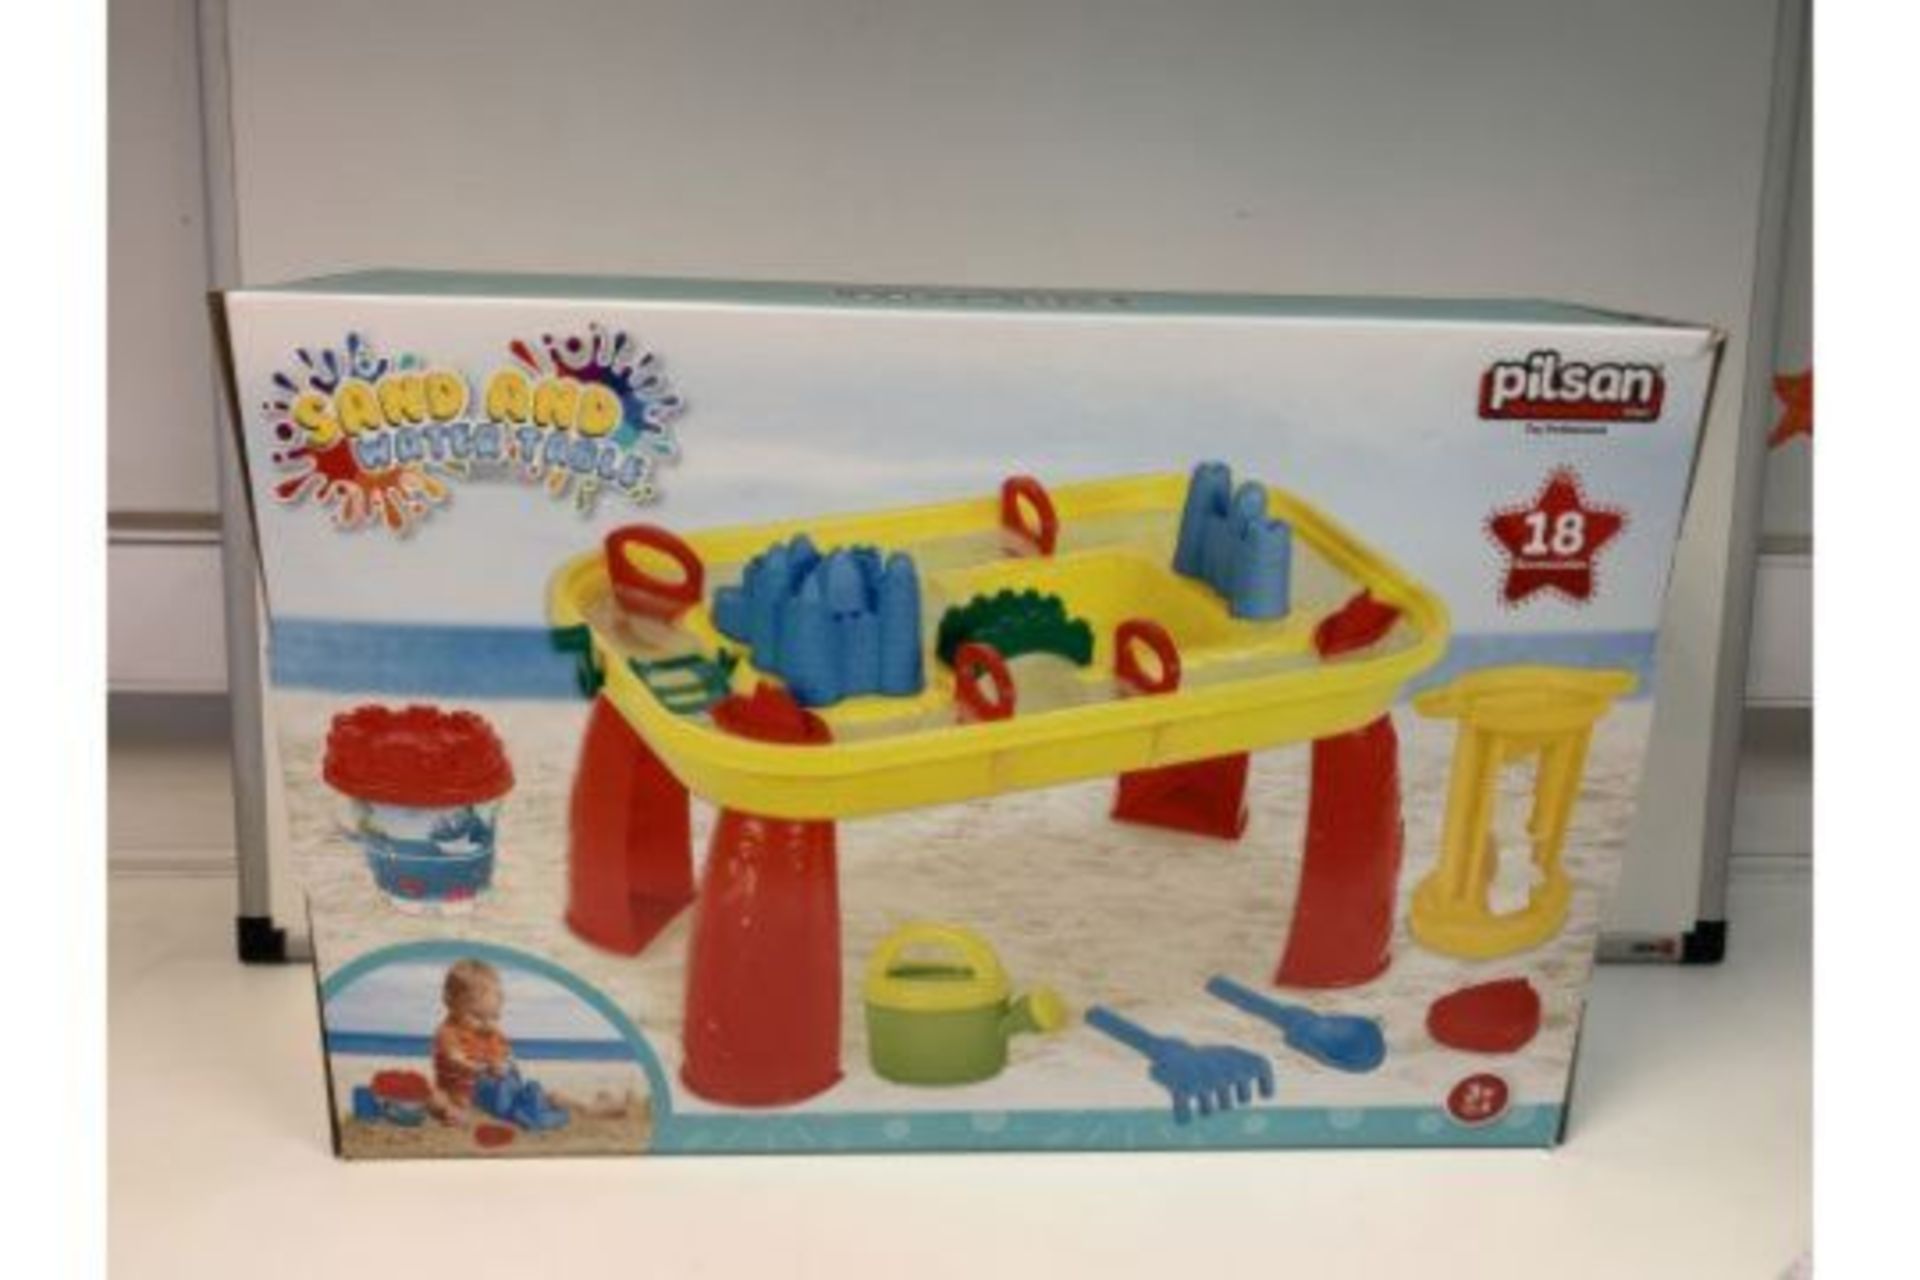 2 X BRAND NEW PILSON 18 PIECE ACCESSORIES SAND AND WATER TABLES R9